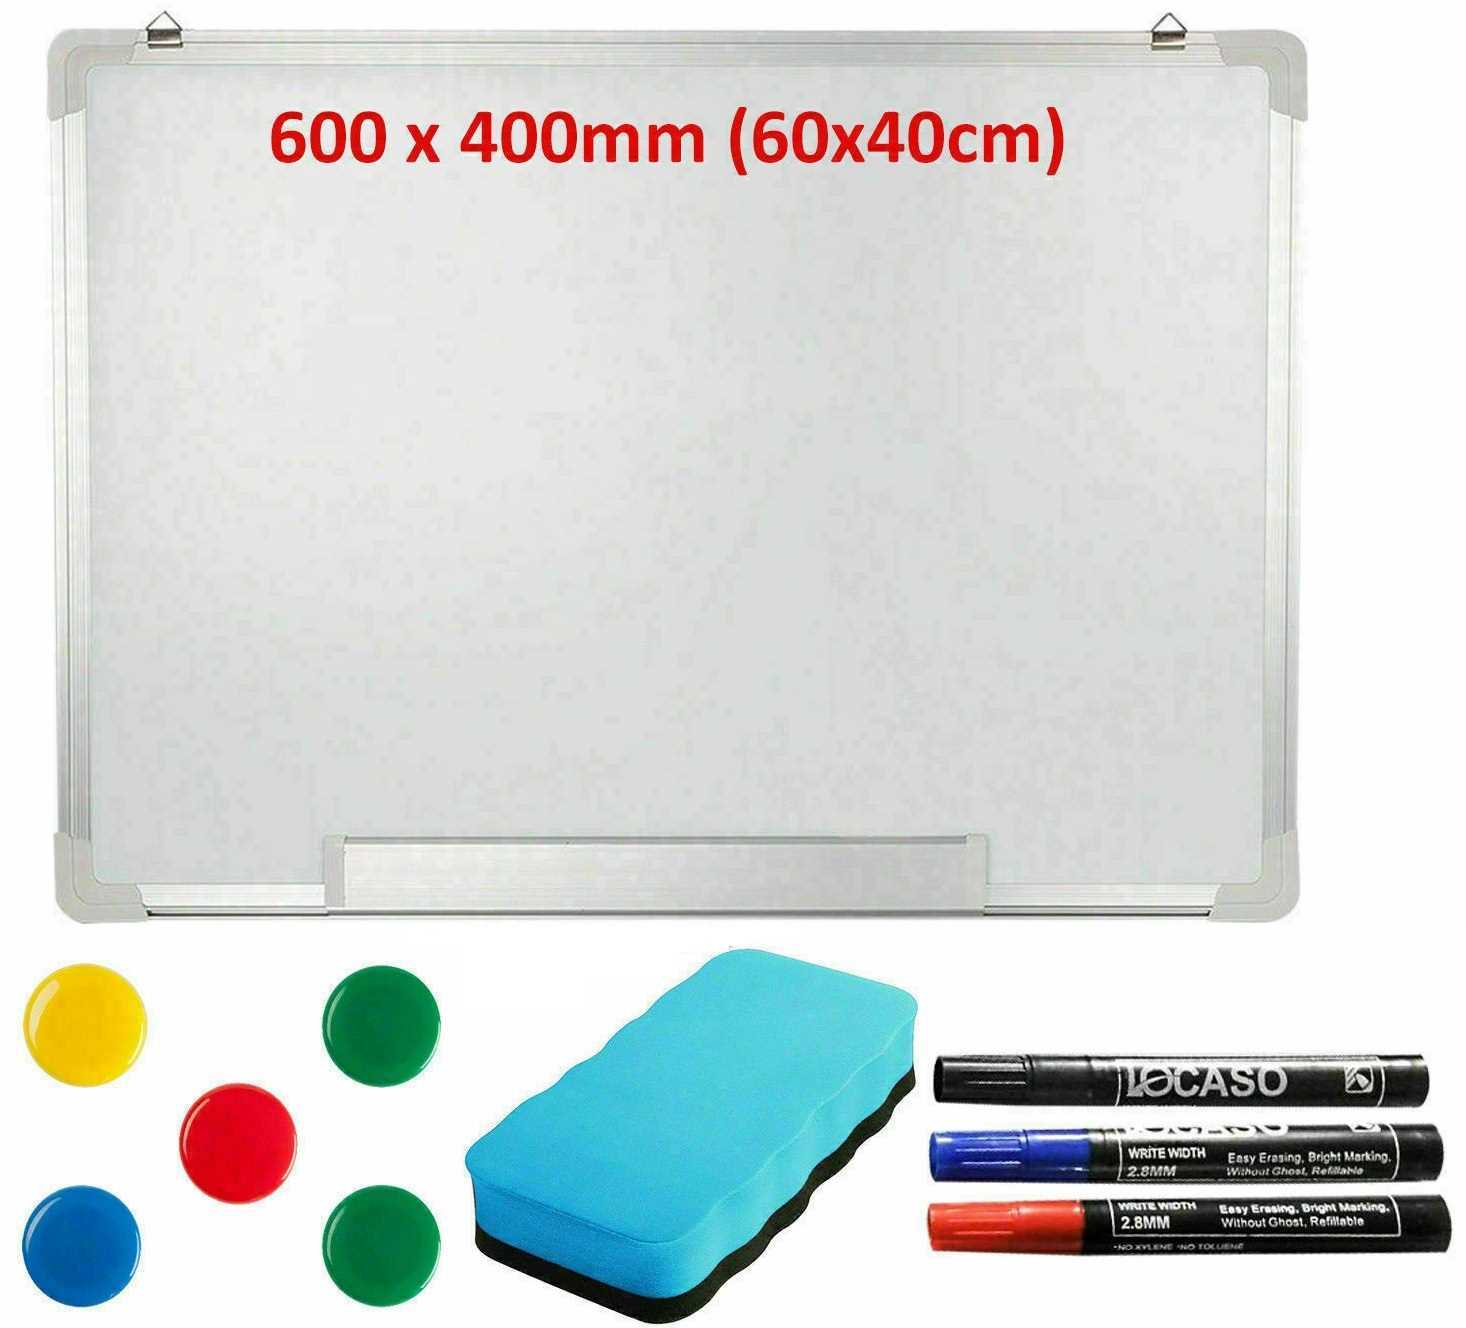 600 X 400mm Magnetic Whiteboard Small Large White Board Dry Wipe Office Home School Notice